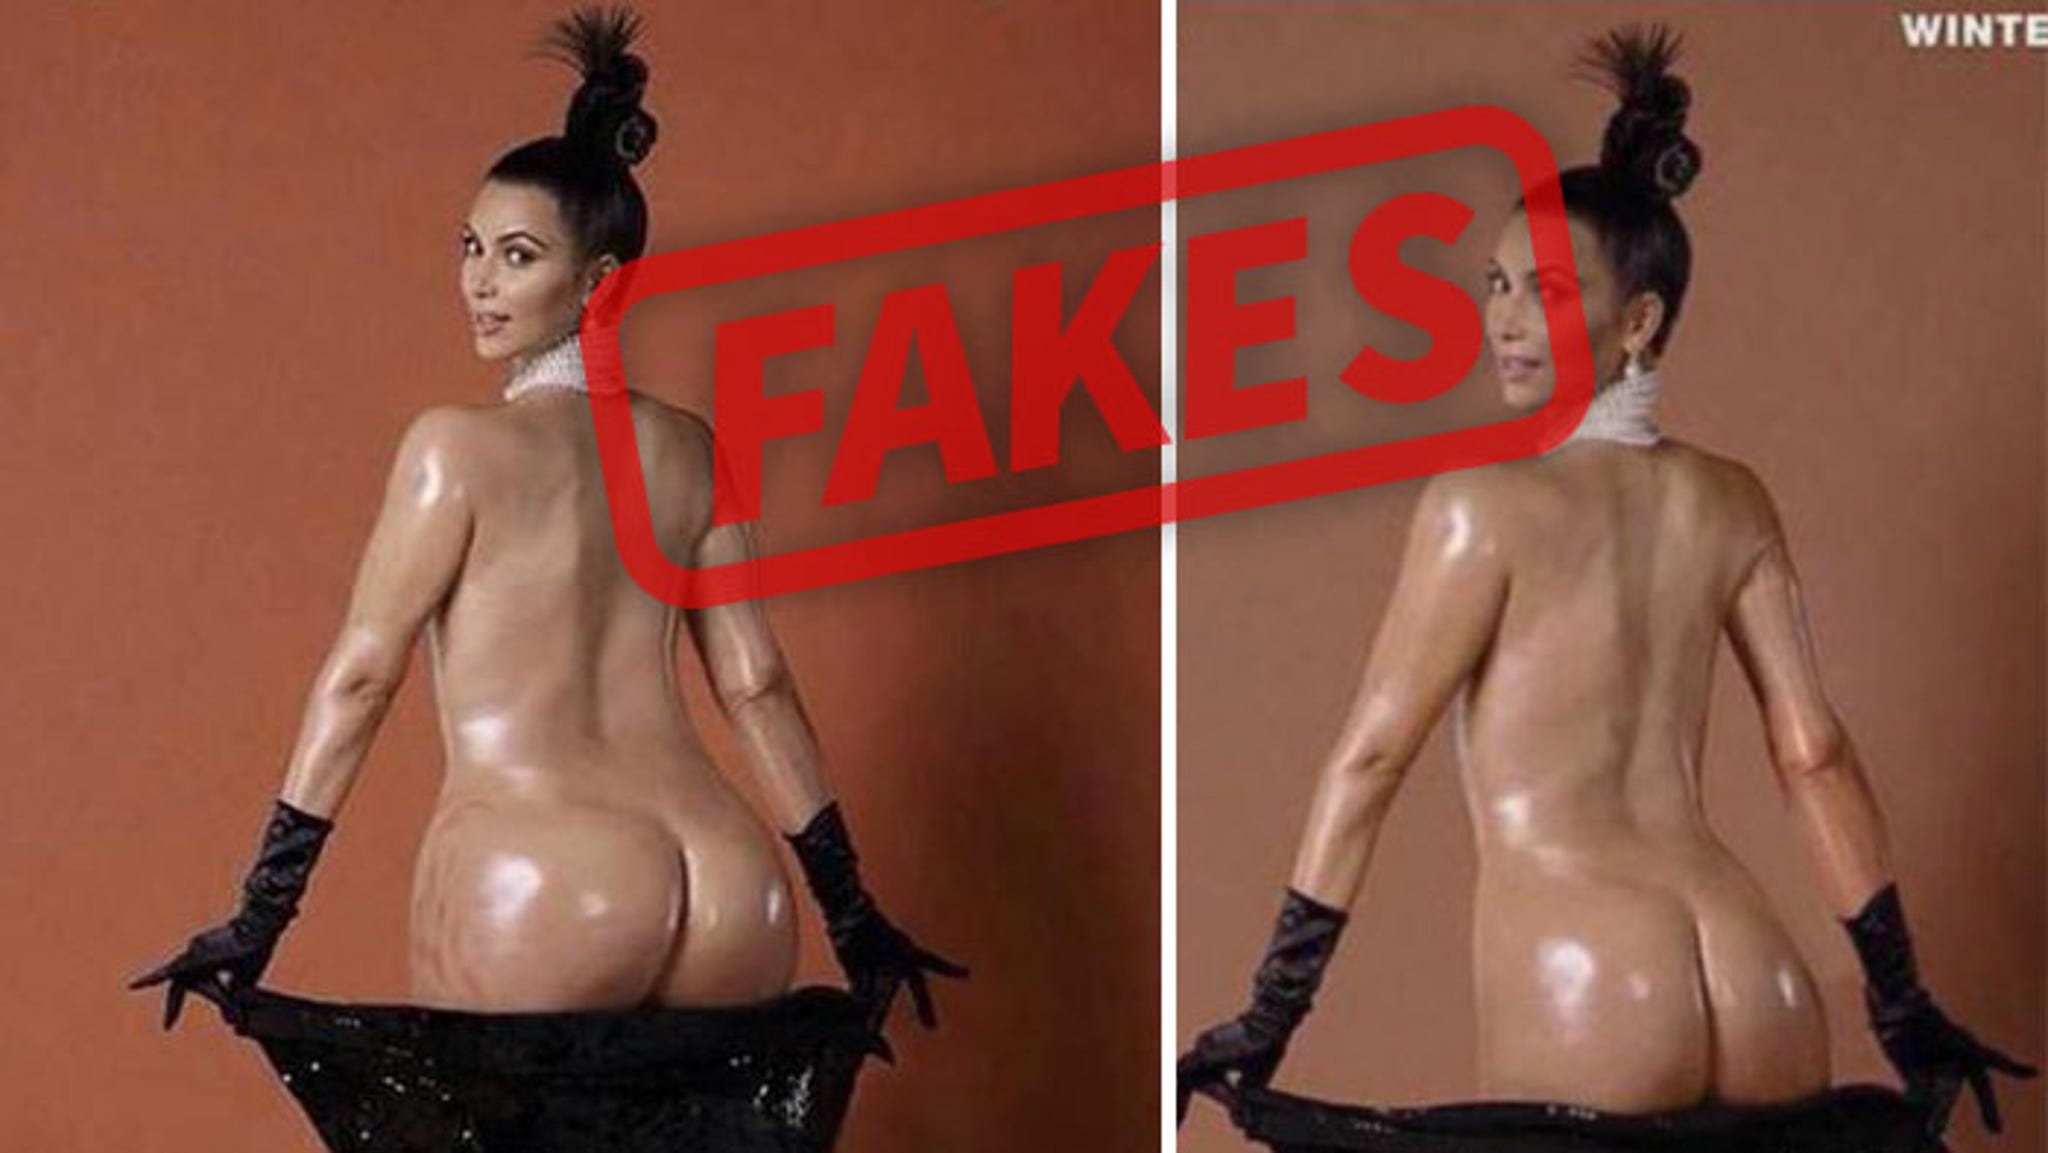 The so-called "untouched" pics of Kim Kardashian's a...